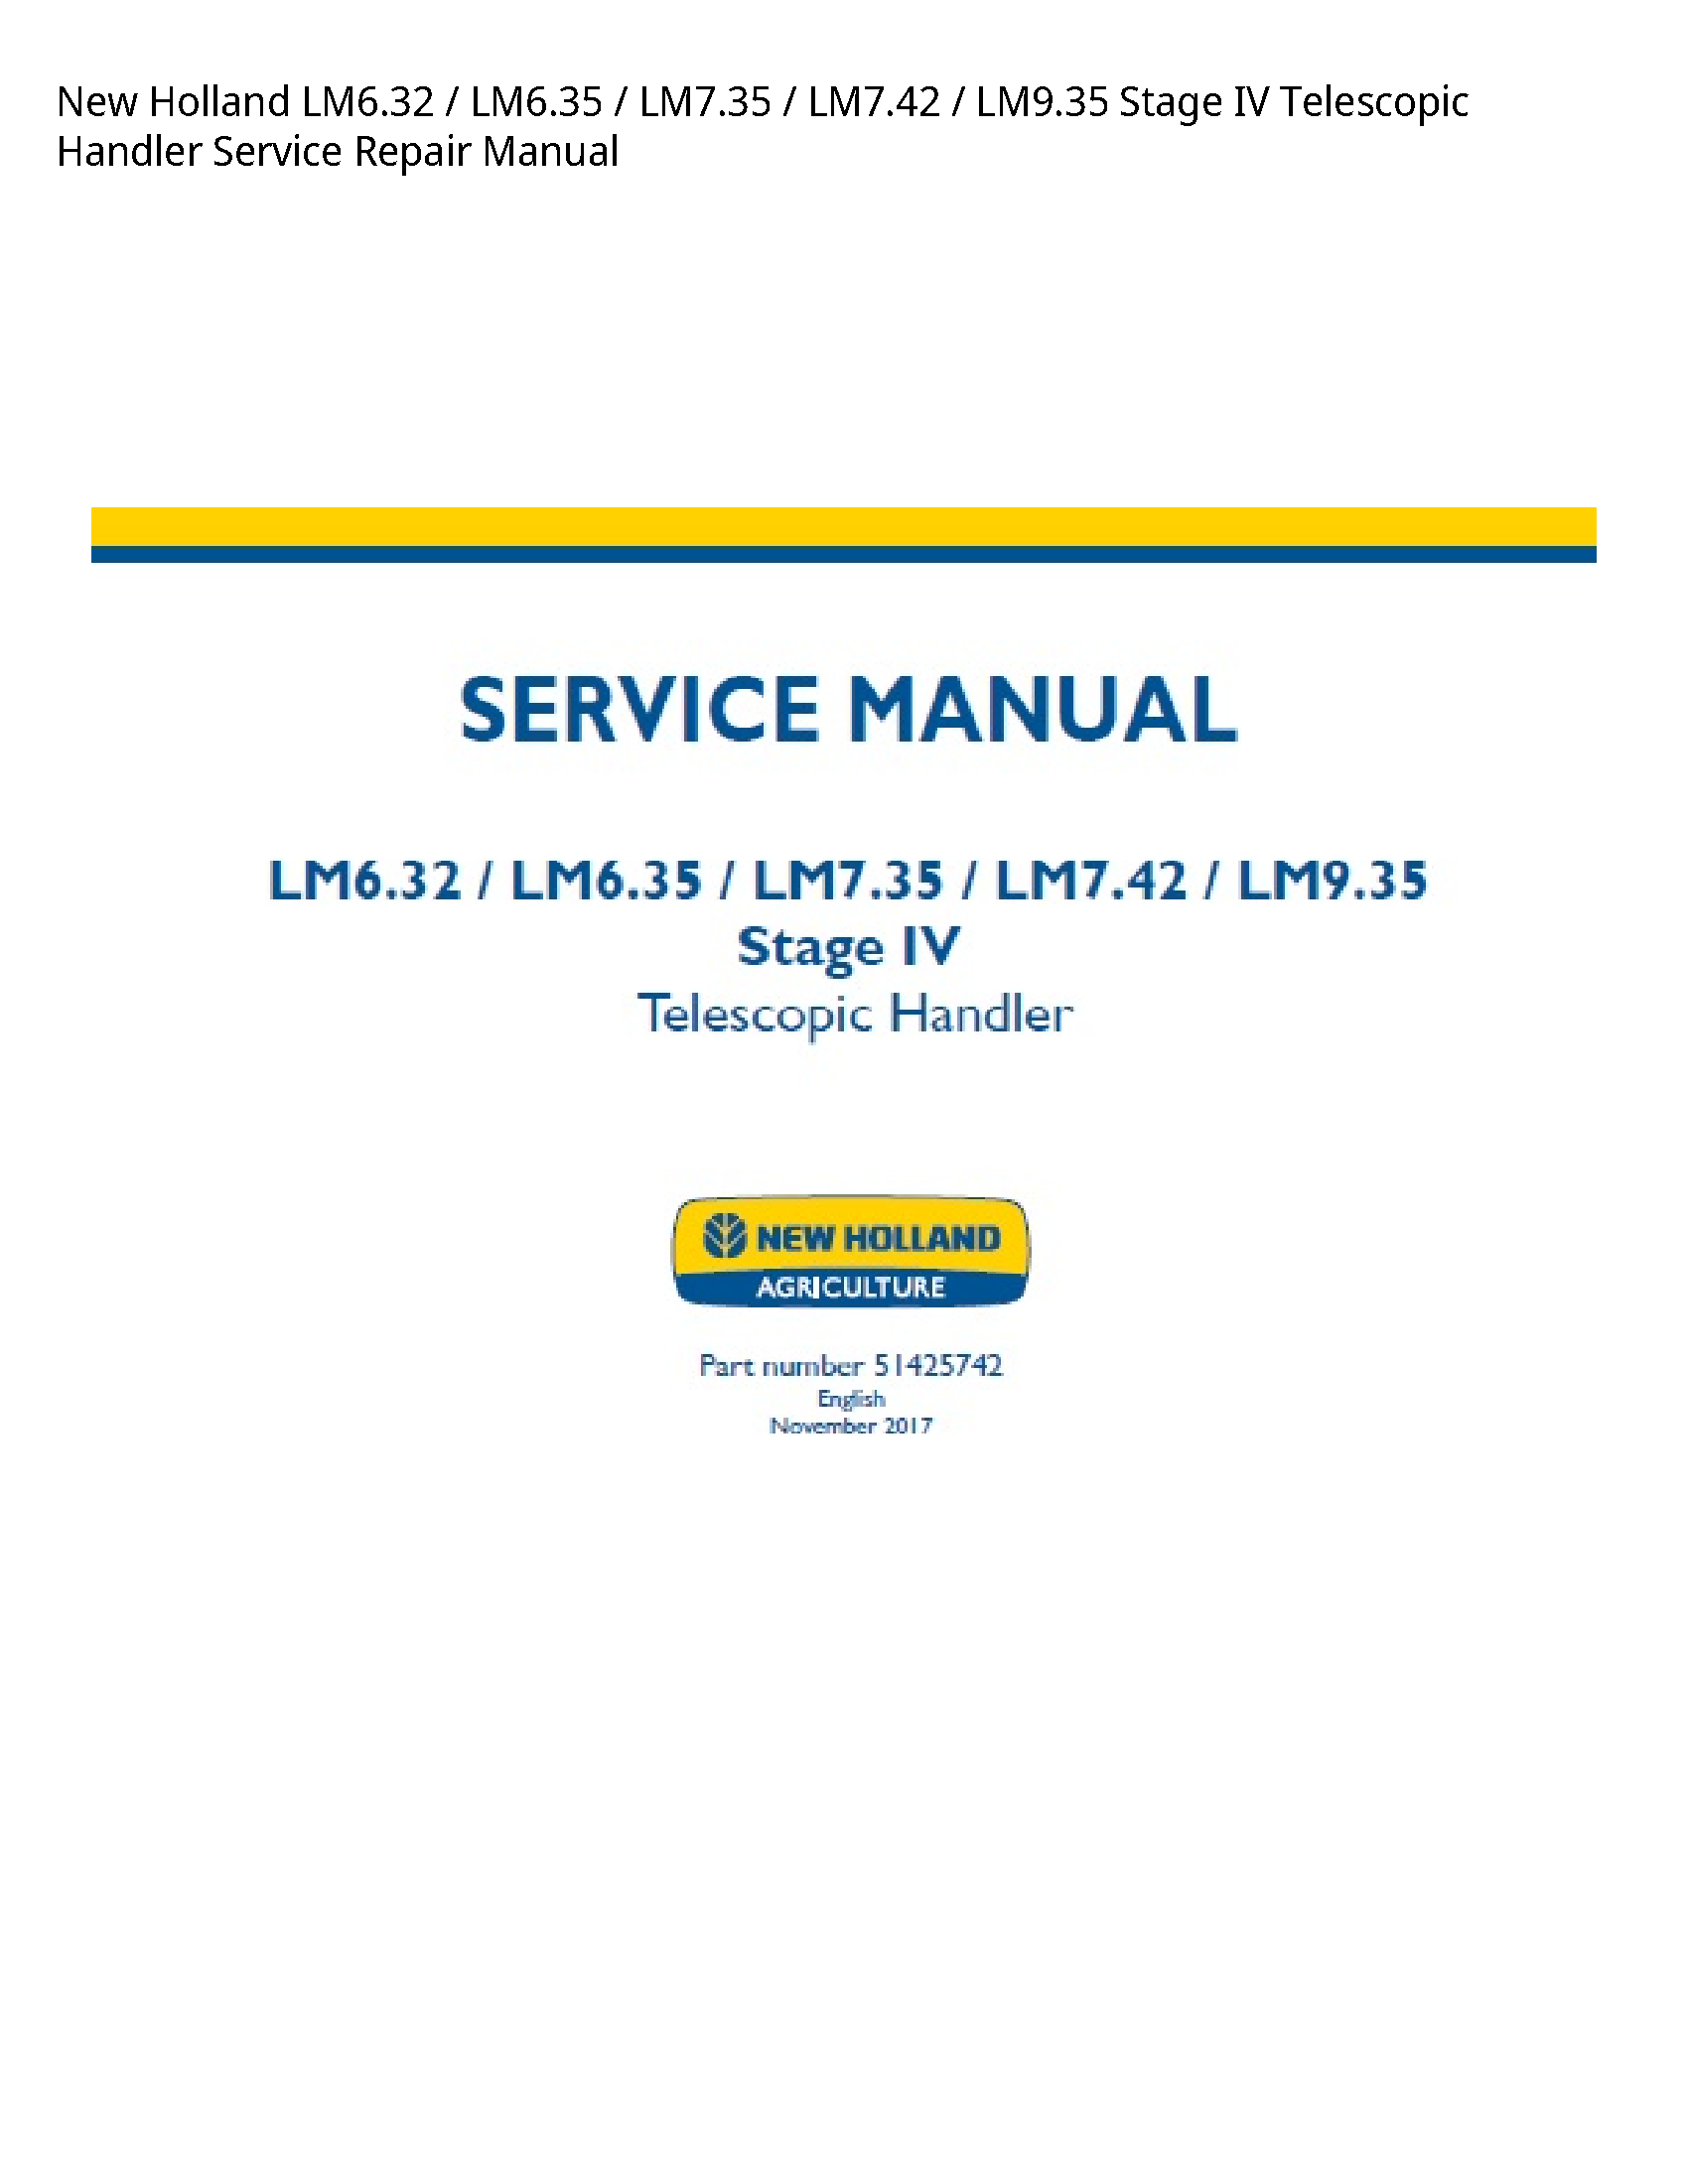 New Holland LM6.32 Stage IV Telescopic Handler manual